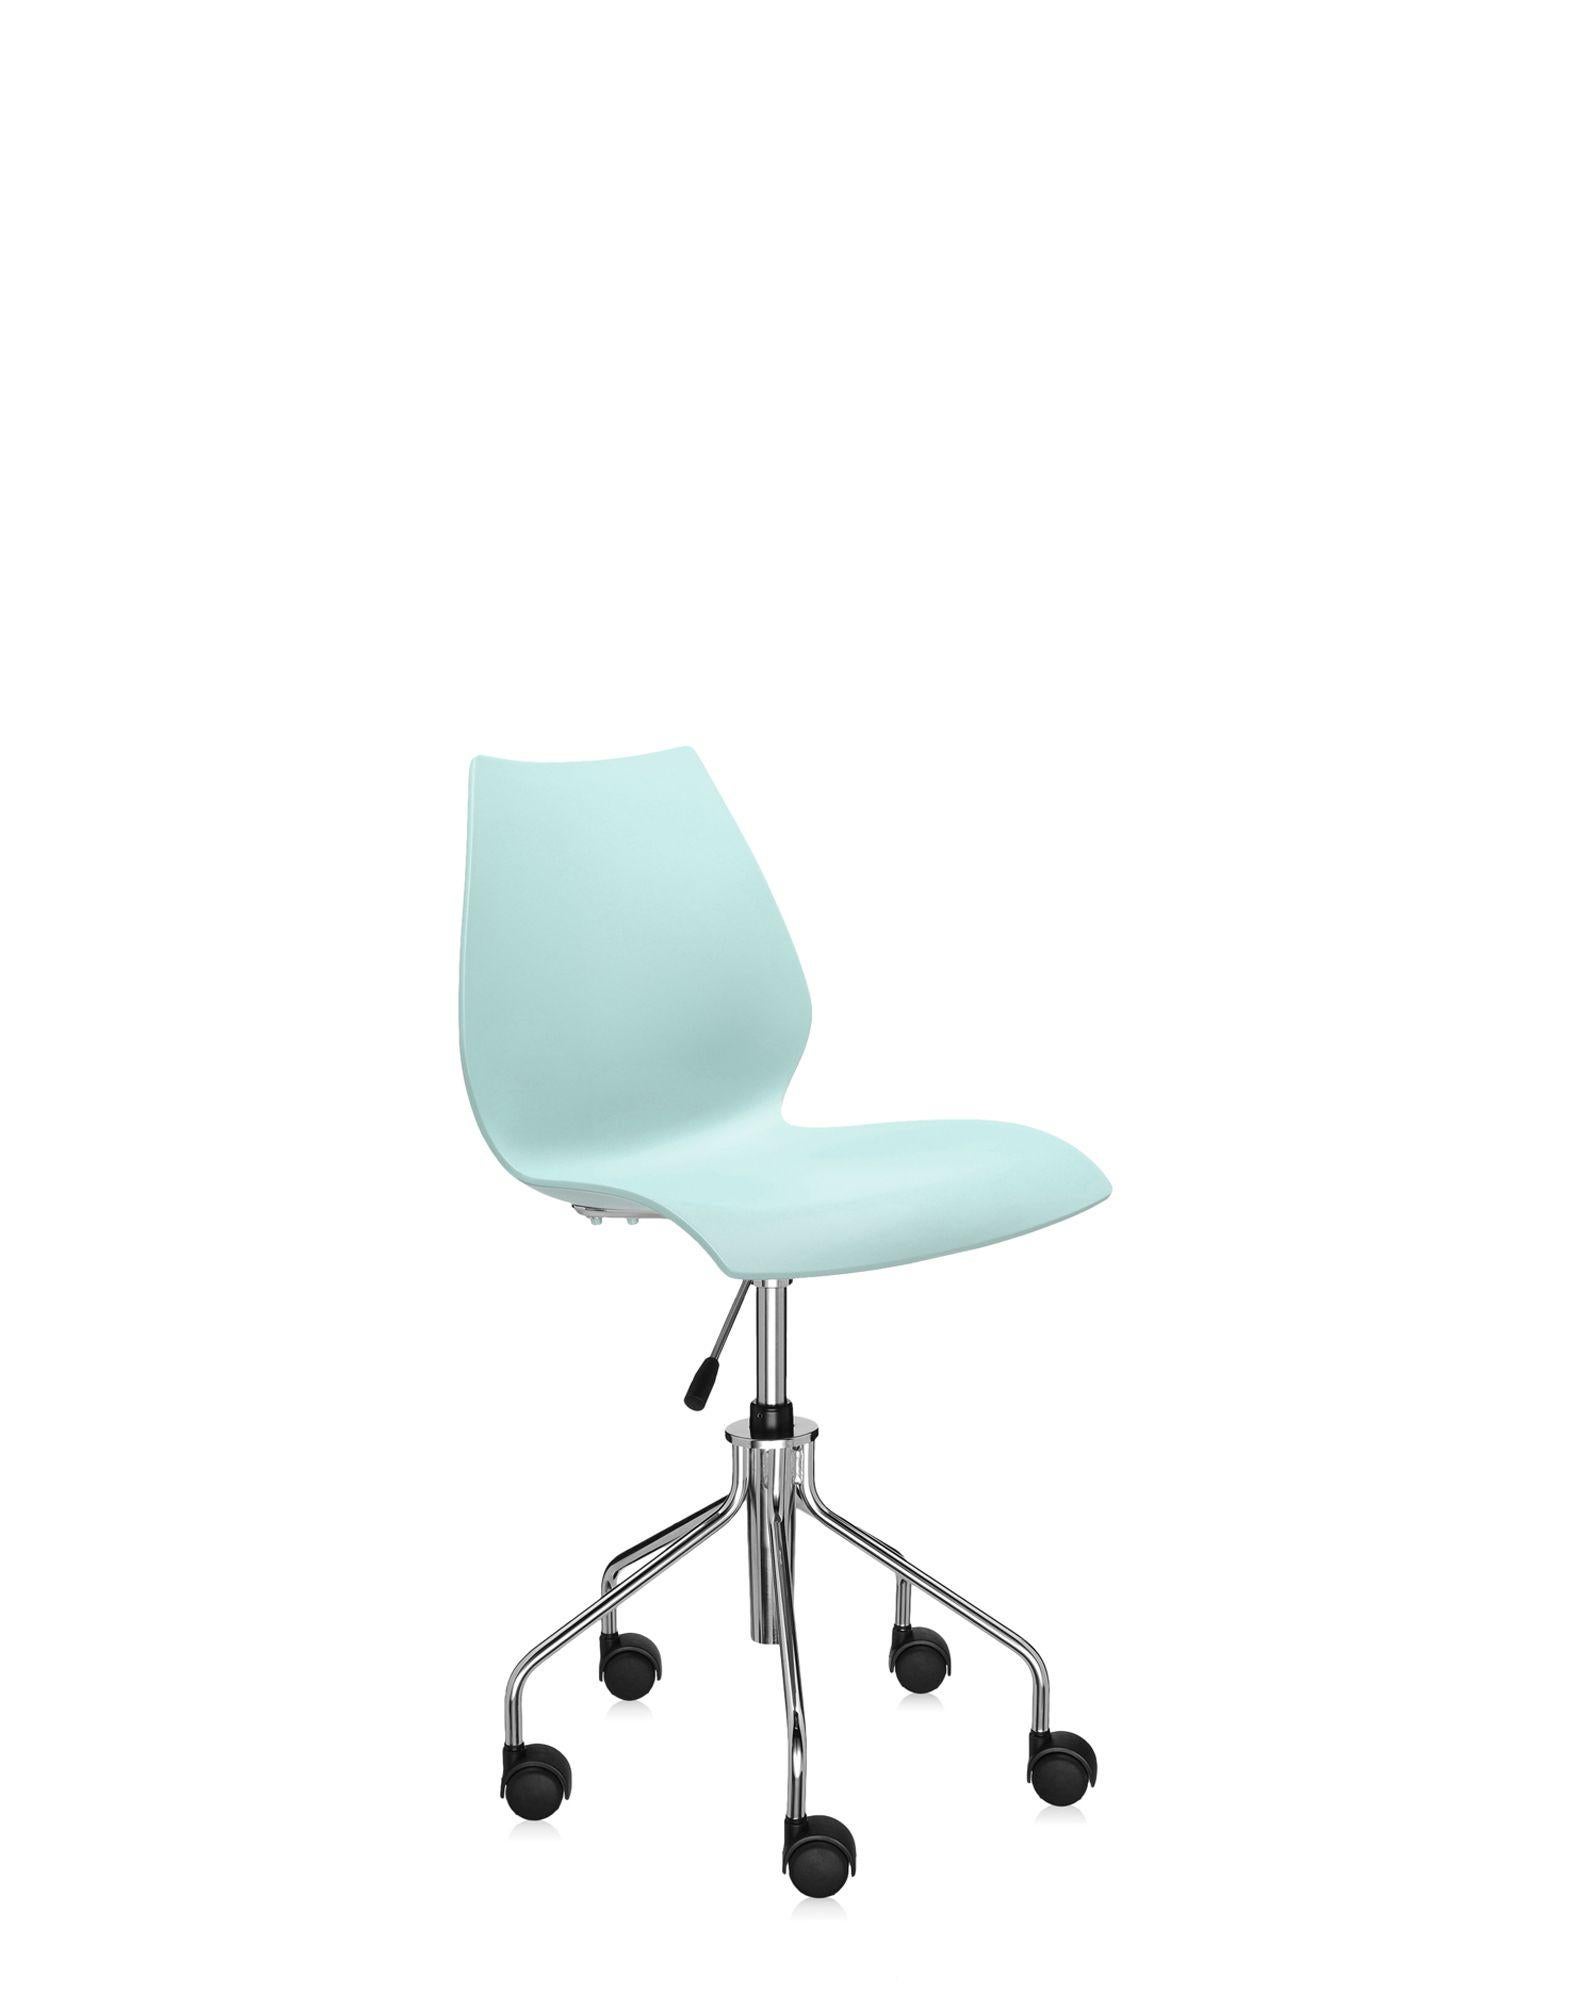 Kartell Maui Swivel Chair Adjustable in Pale Blue by Vico Magistretti In New Condition In Brooklyn, NY